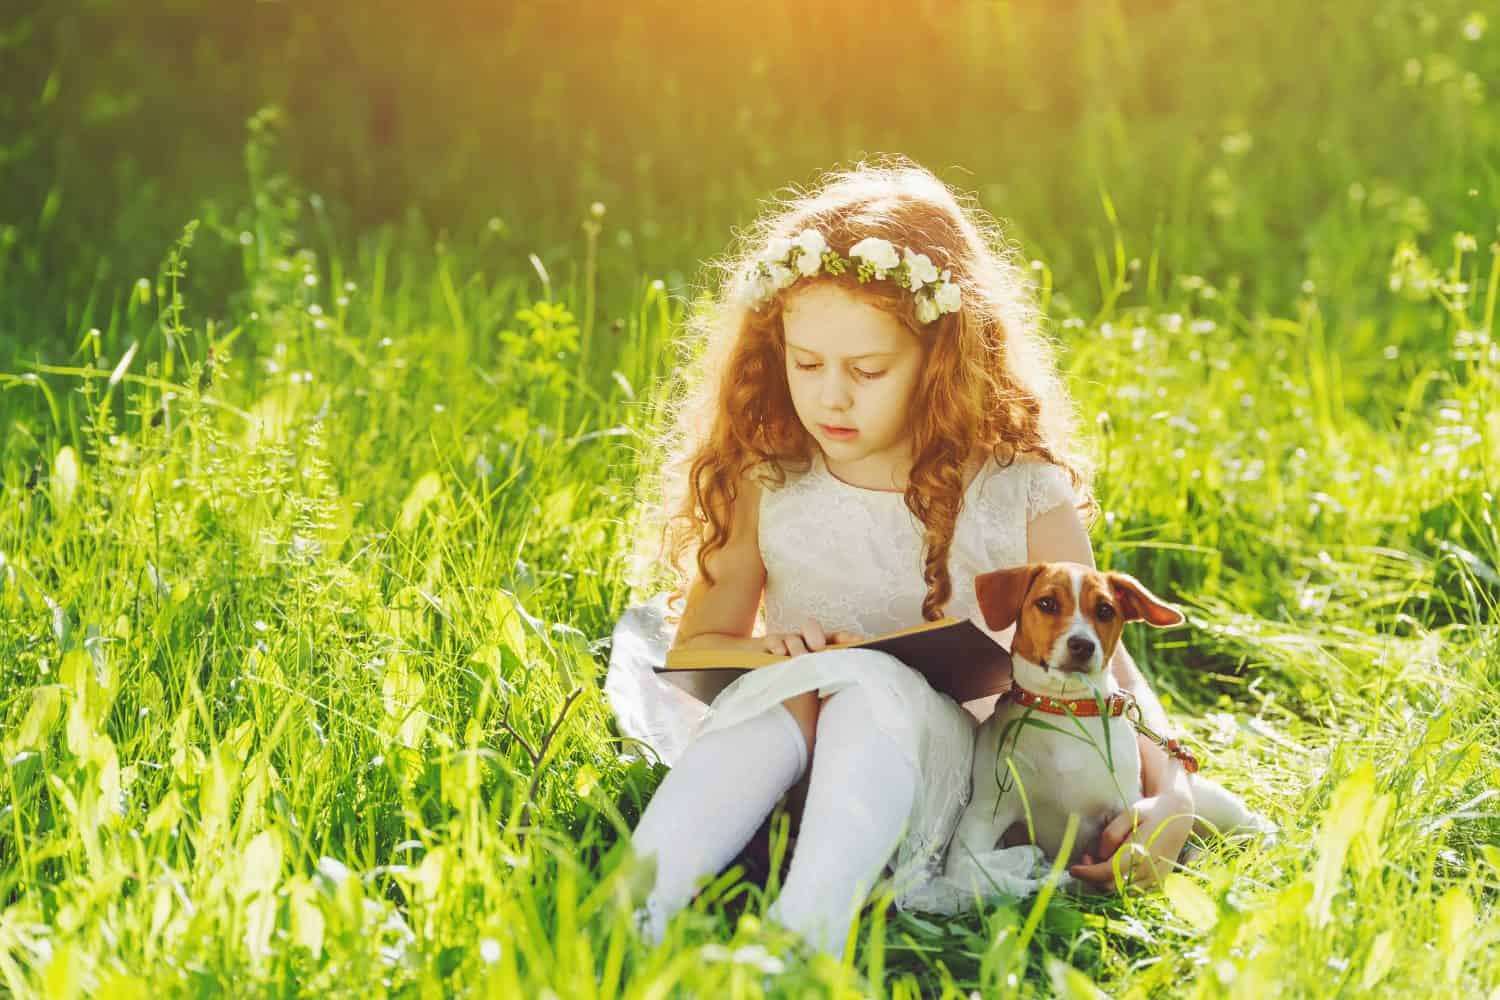 Little girl reading a book with her friend puppy dog in the outdoors.